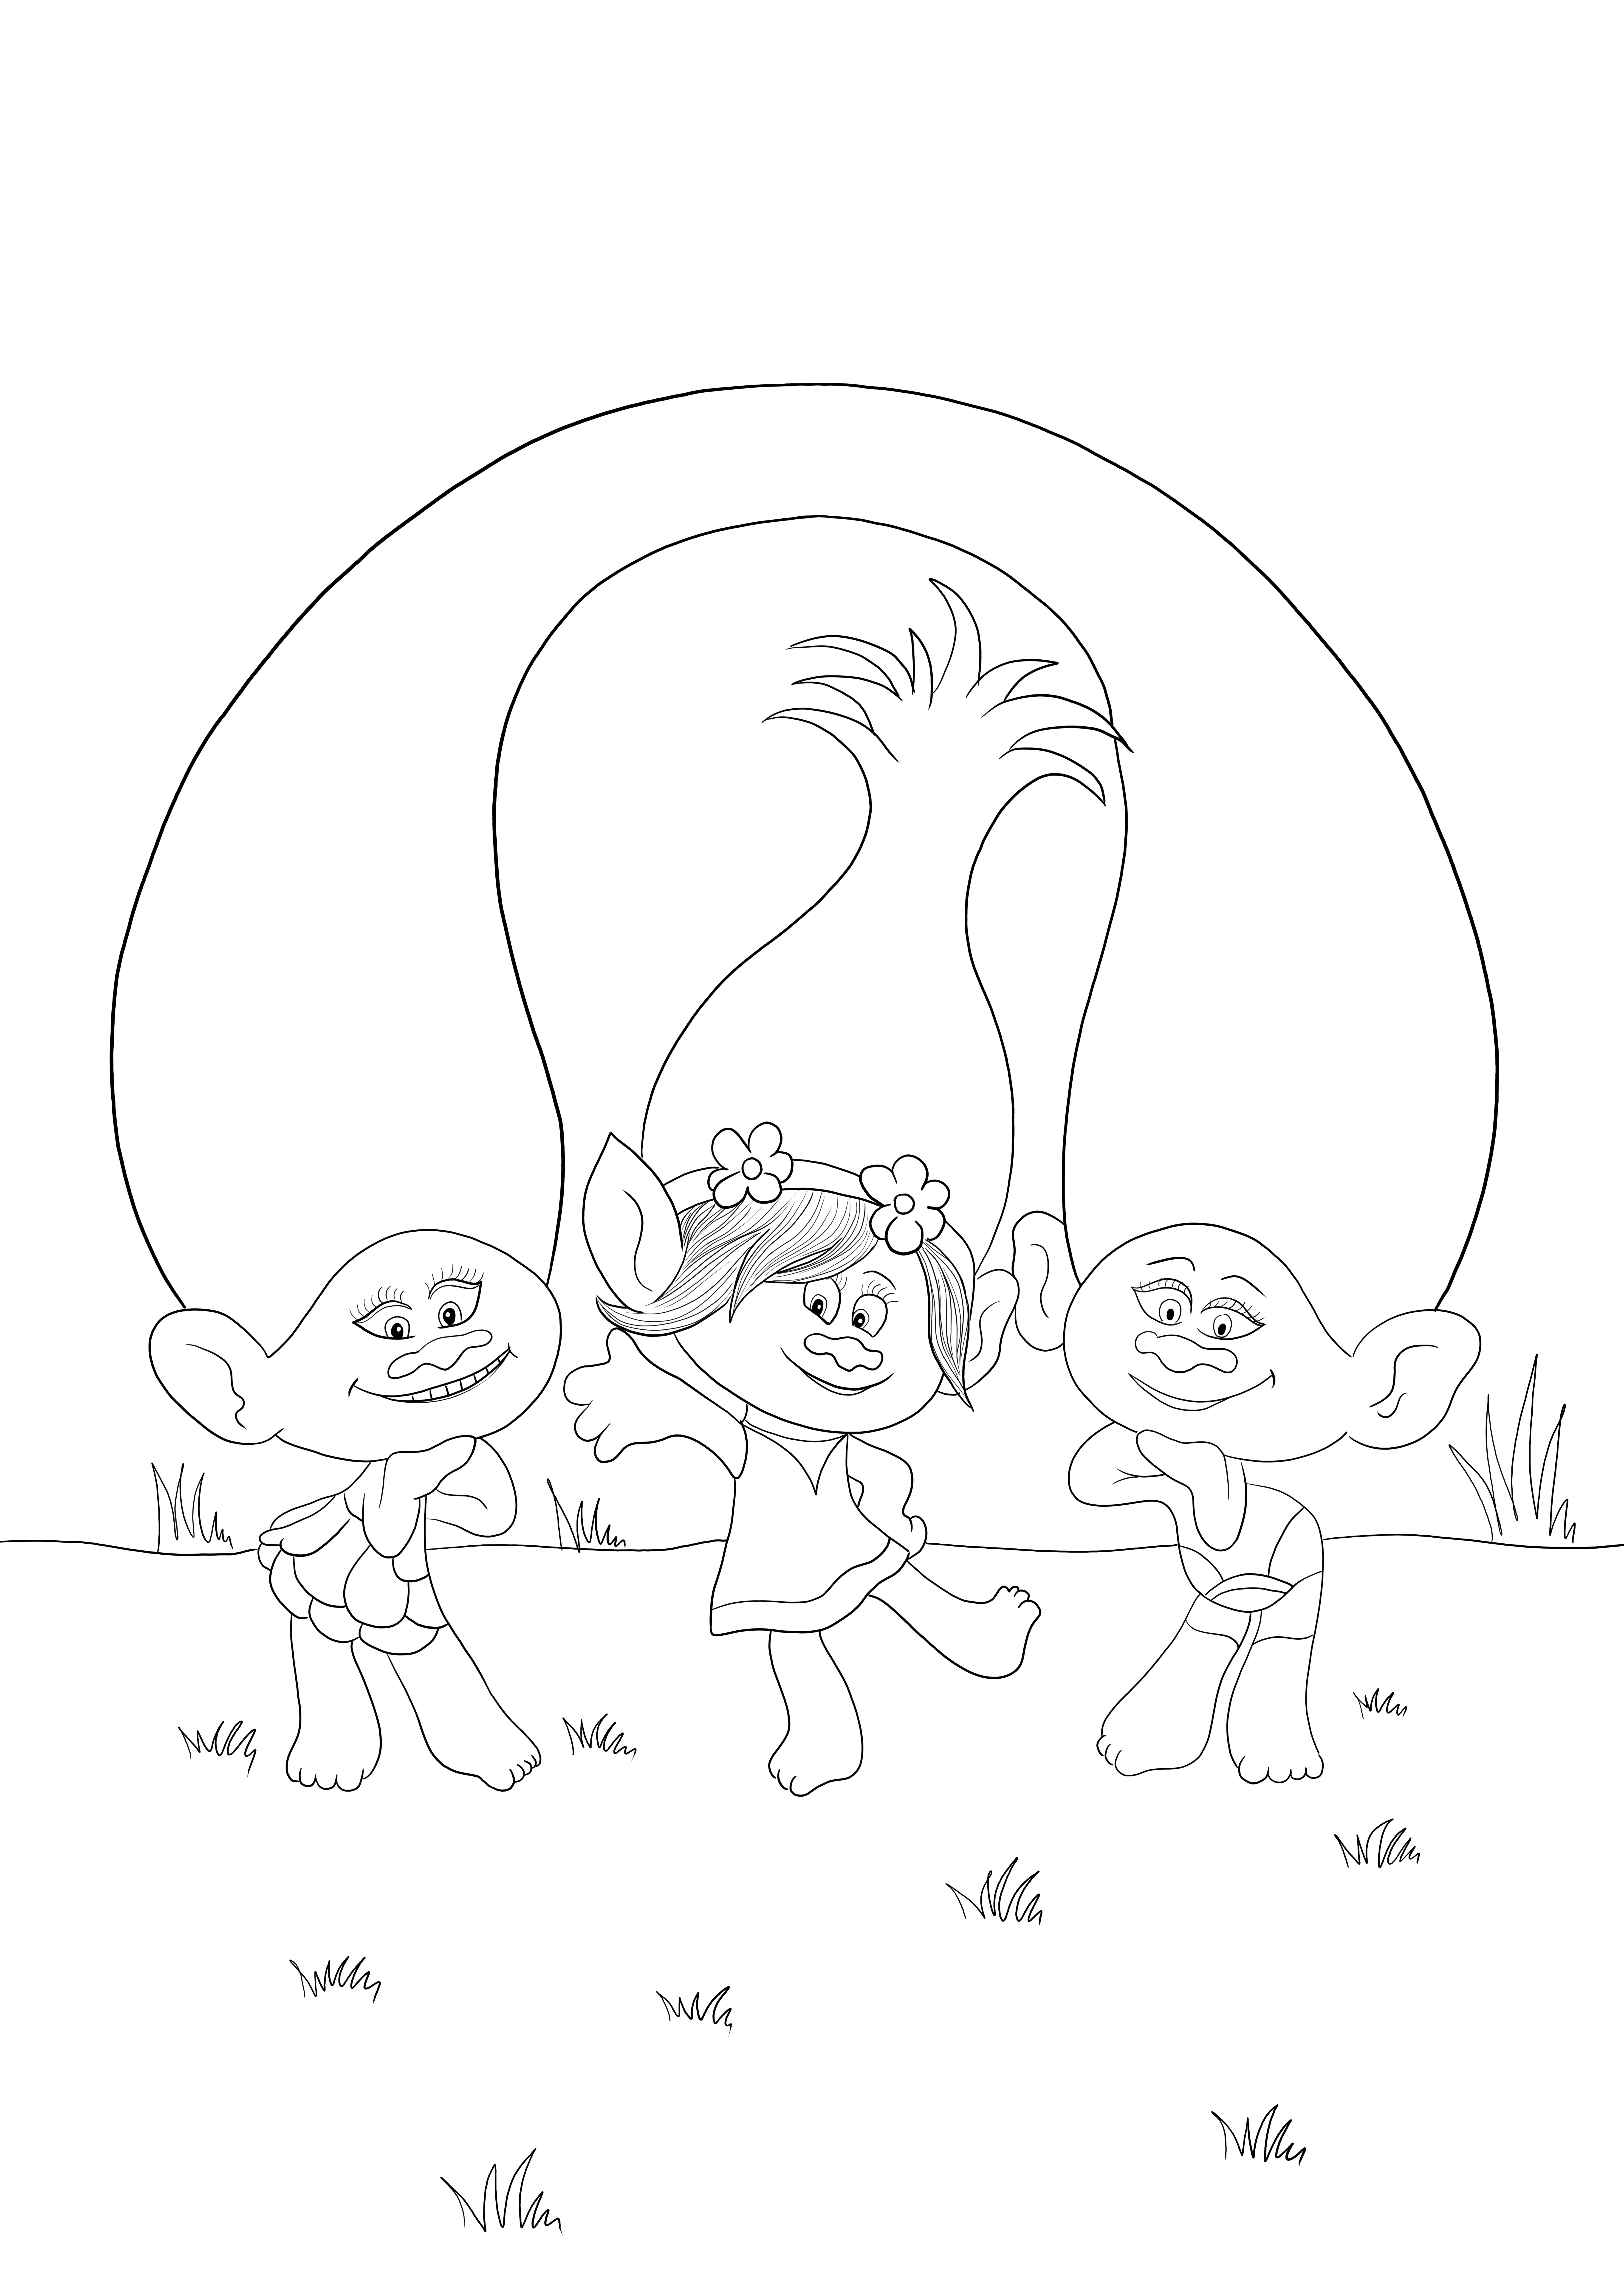 Poppy with Satin & Chenille from Trolls are waiting to be printed and colored for free